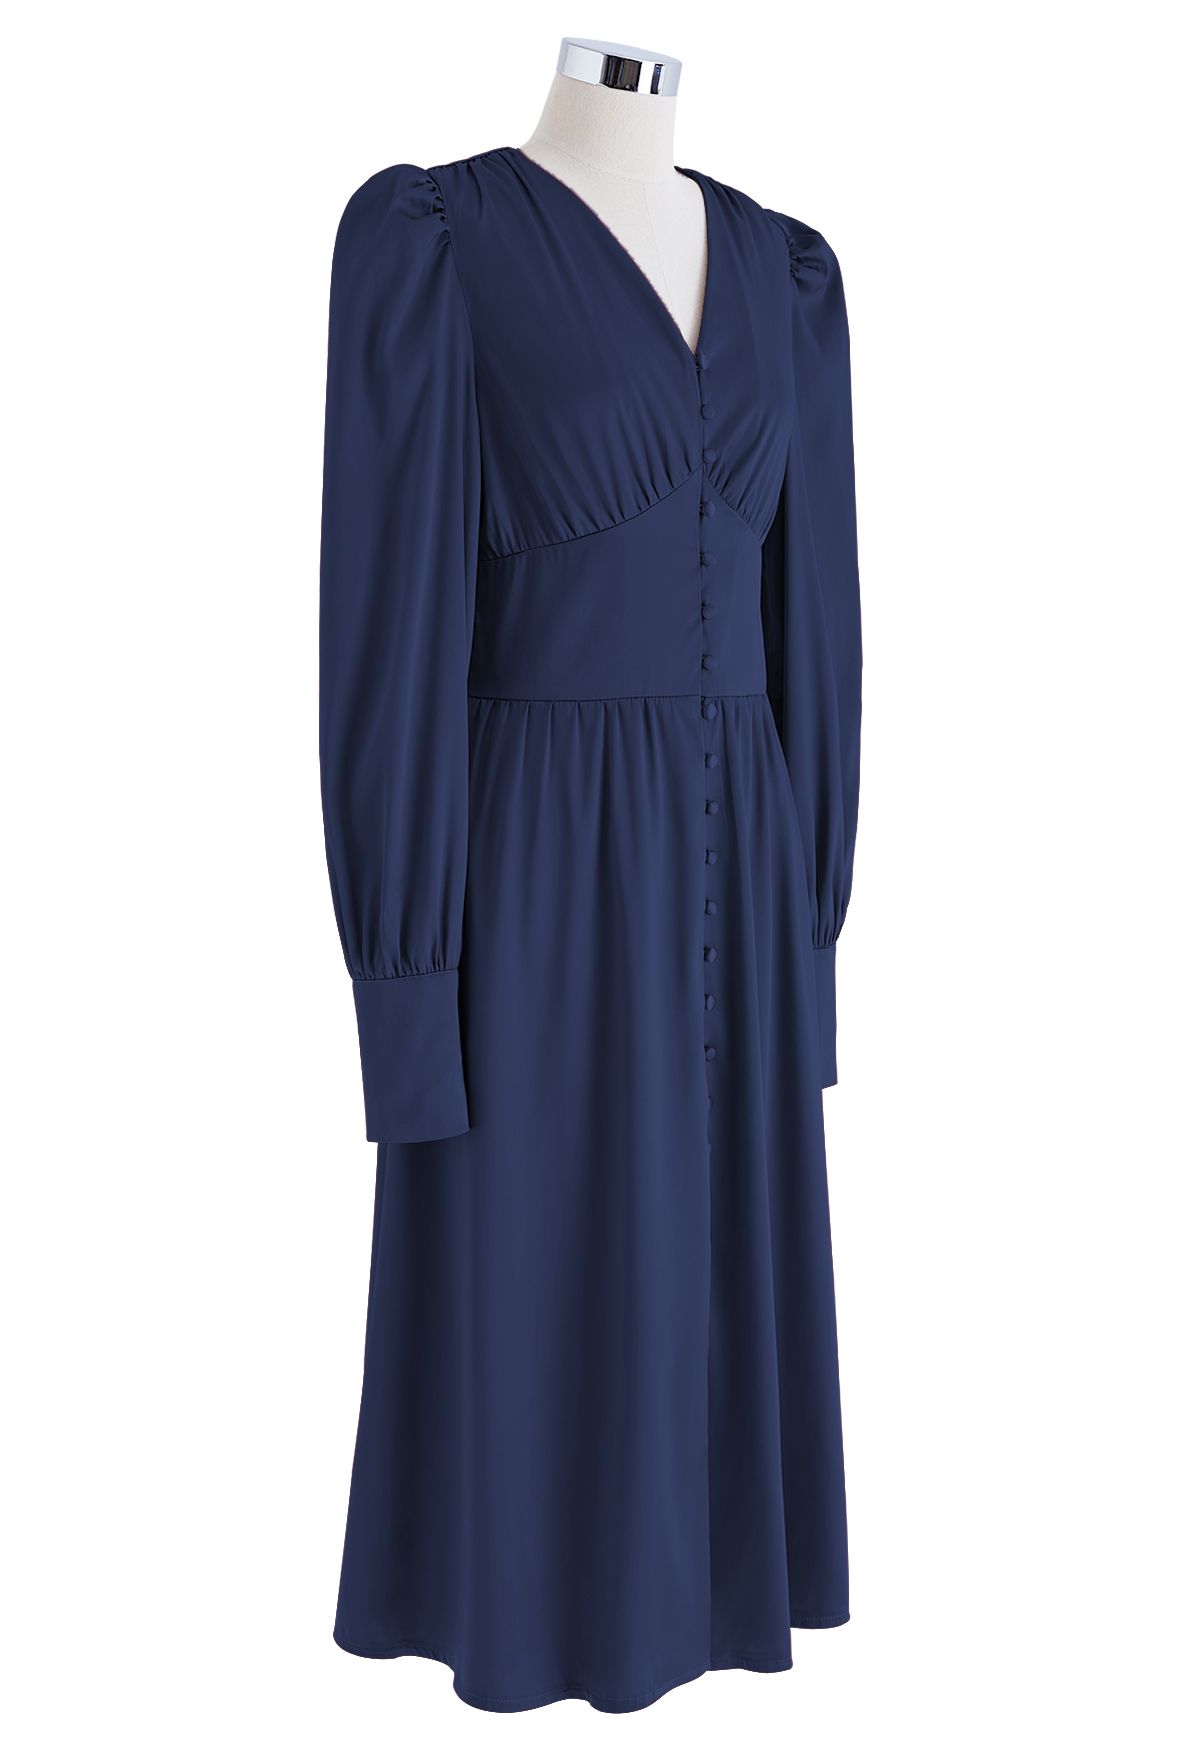 Puff Sleeves Button Up Satin Midi Dress in Navy